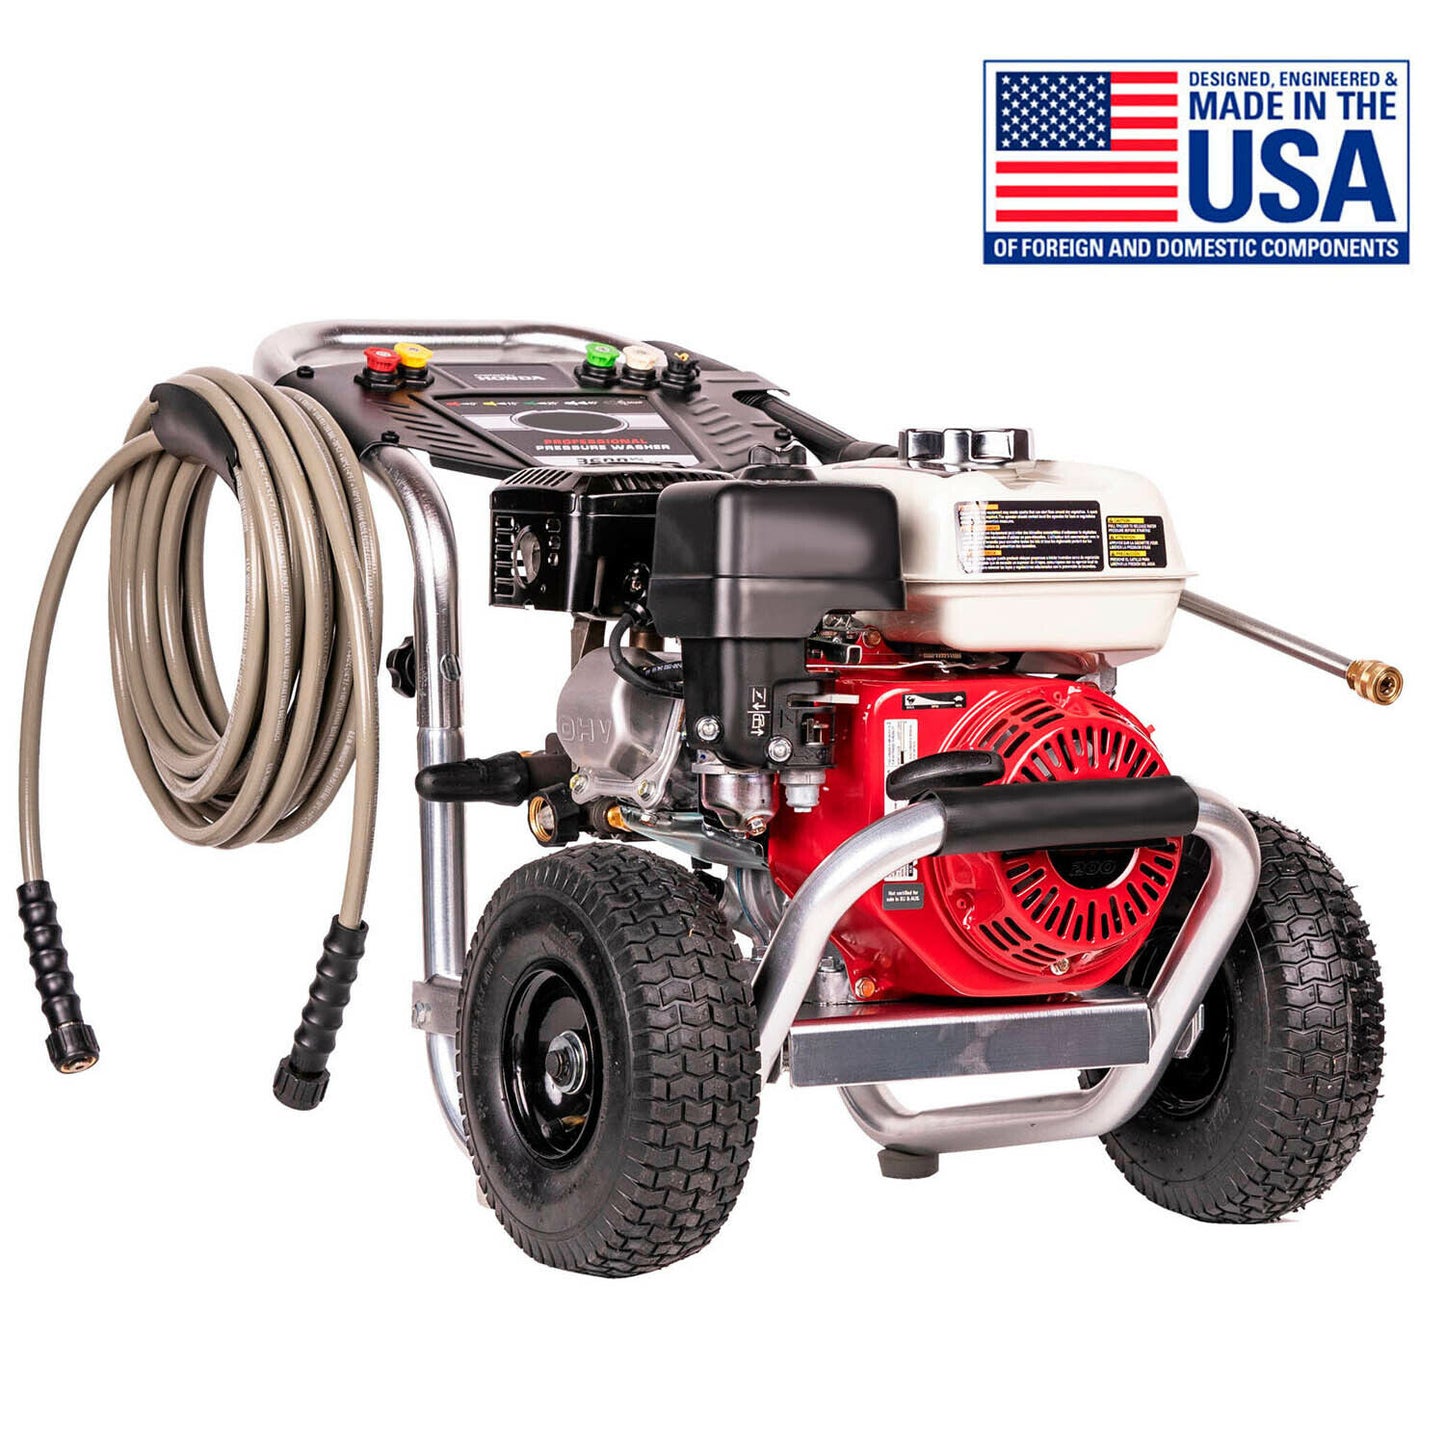 Pressure Washer - 3600 PSI - Cold Water - Gas Powered - 2.5 GPM - AAA Triplex